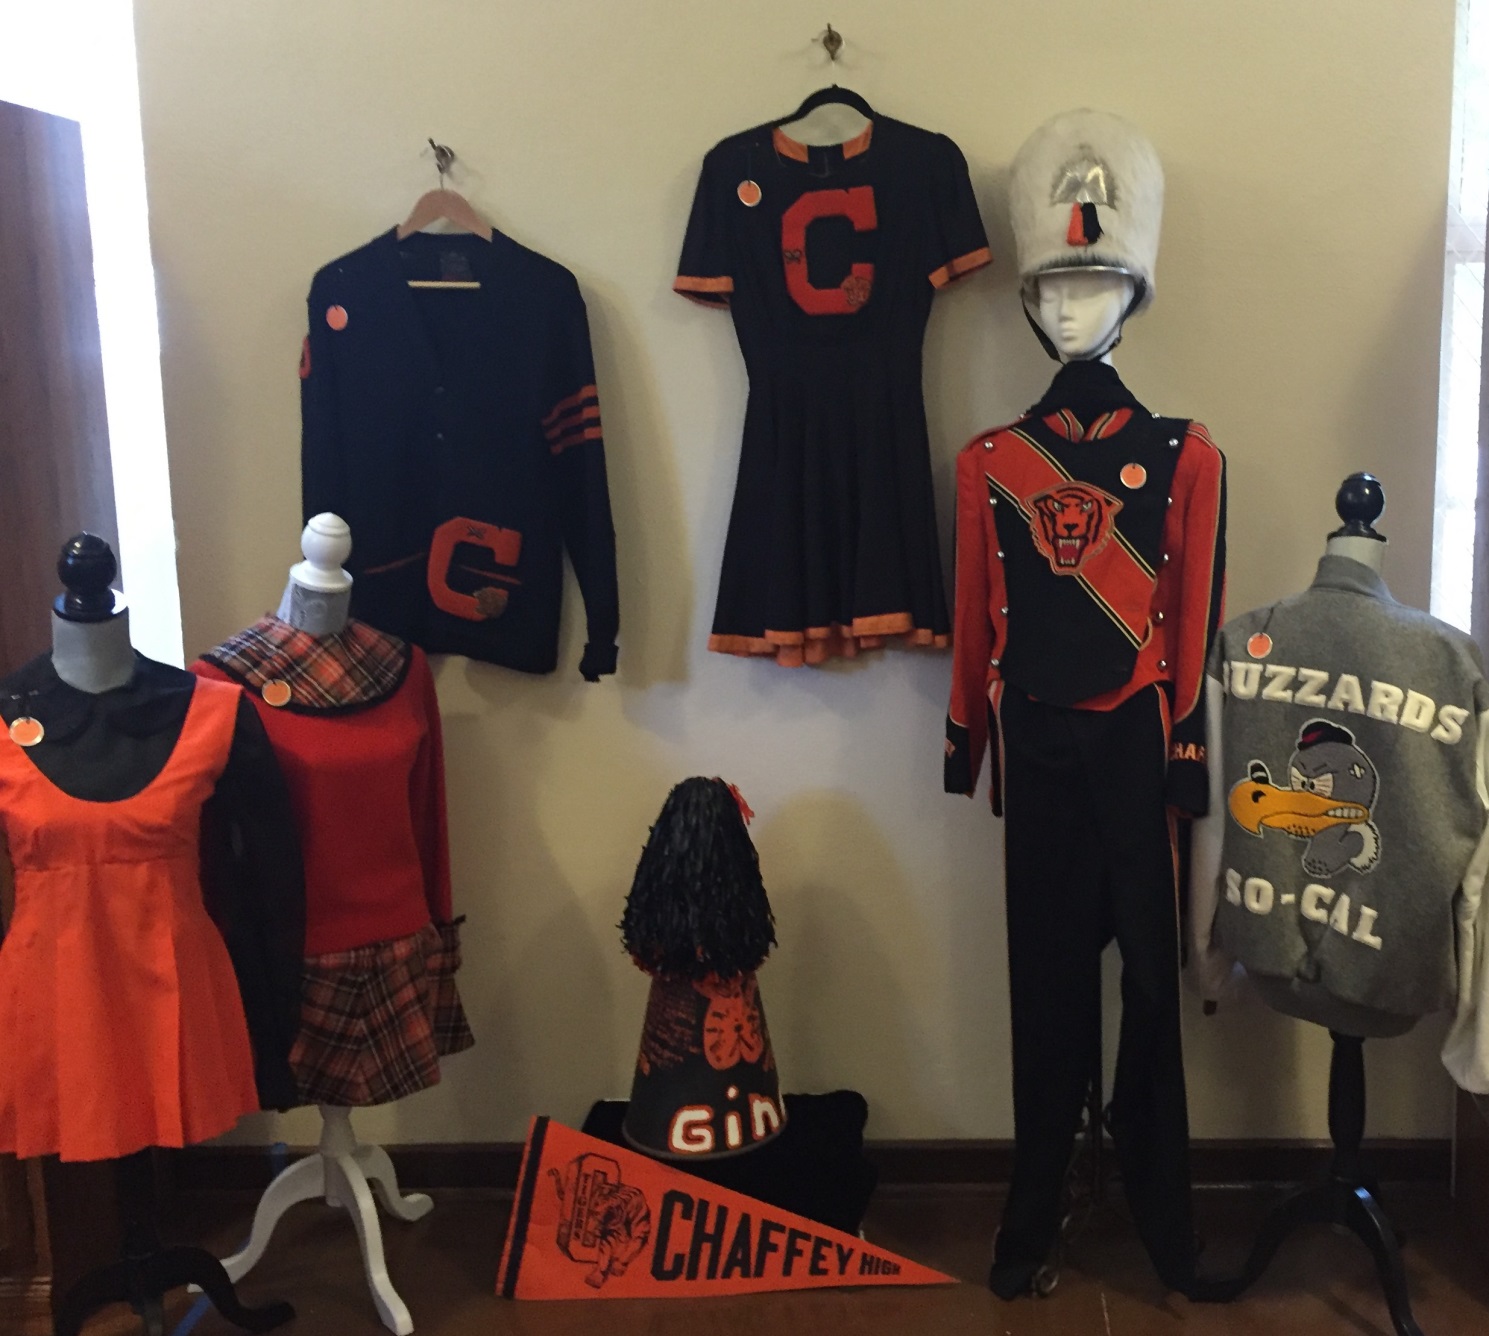 History Project Display - Uniforms and Letterman Jackets